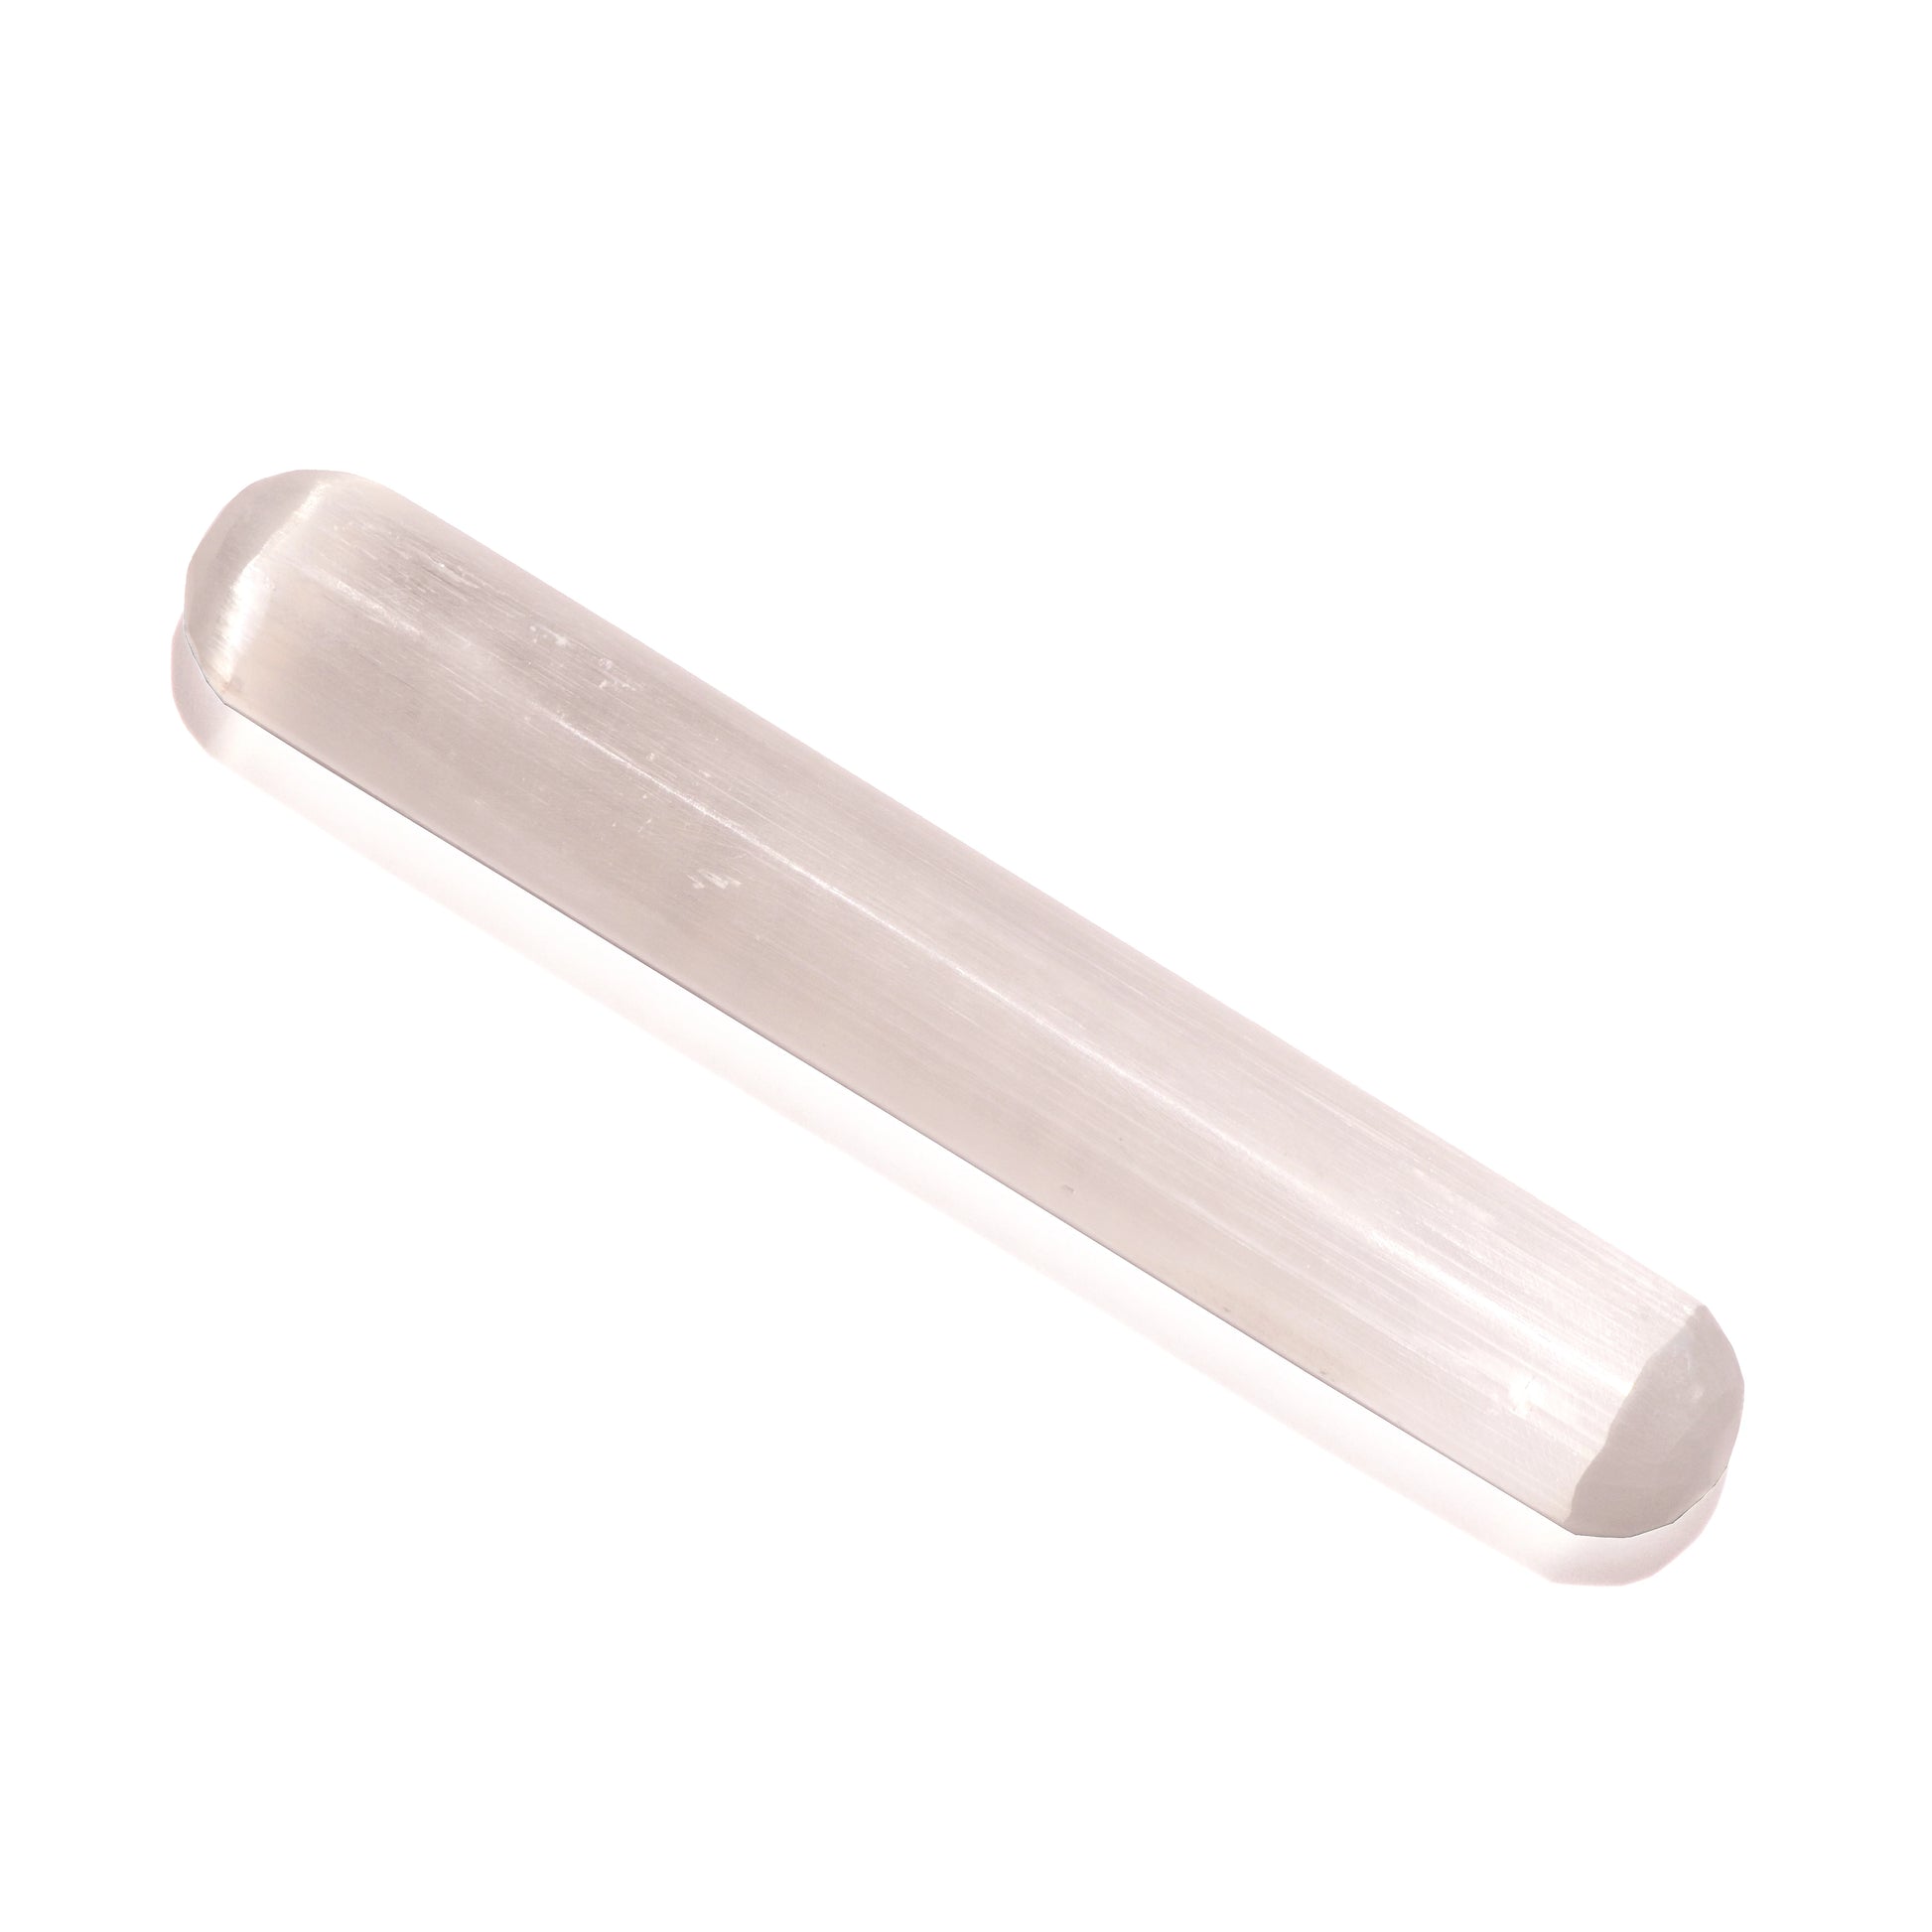 Selenite Wand - Rounded Tip - Polished Crystal